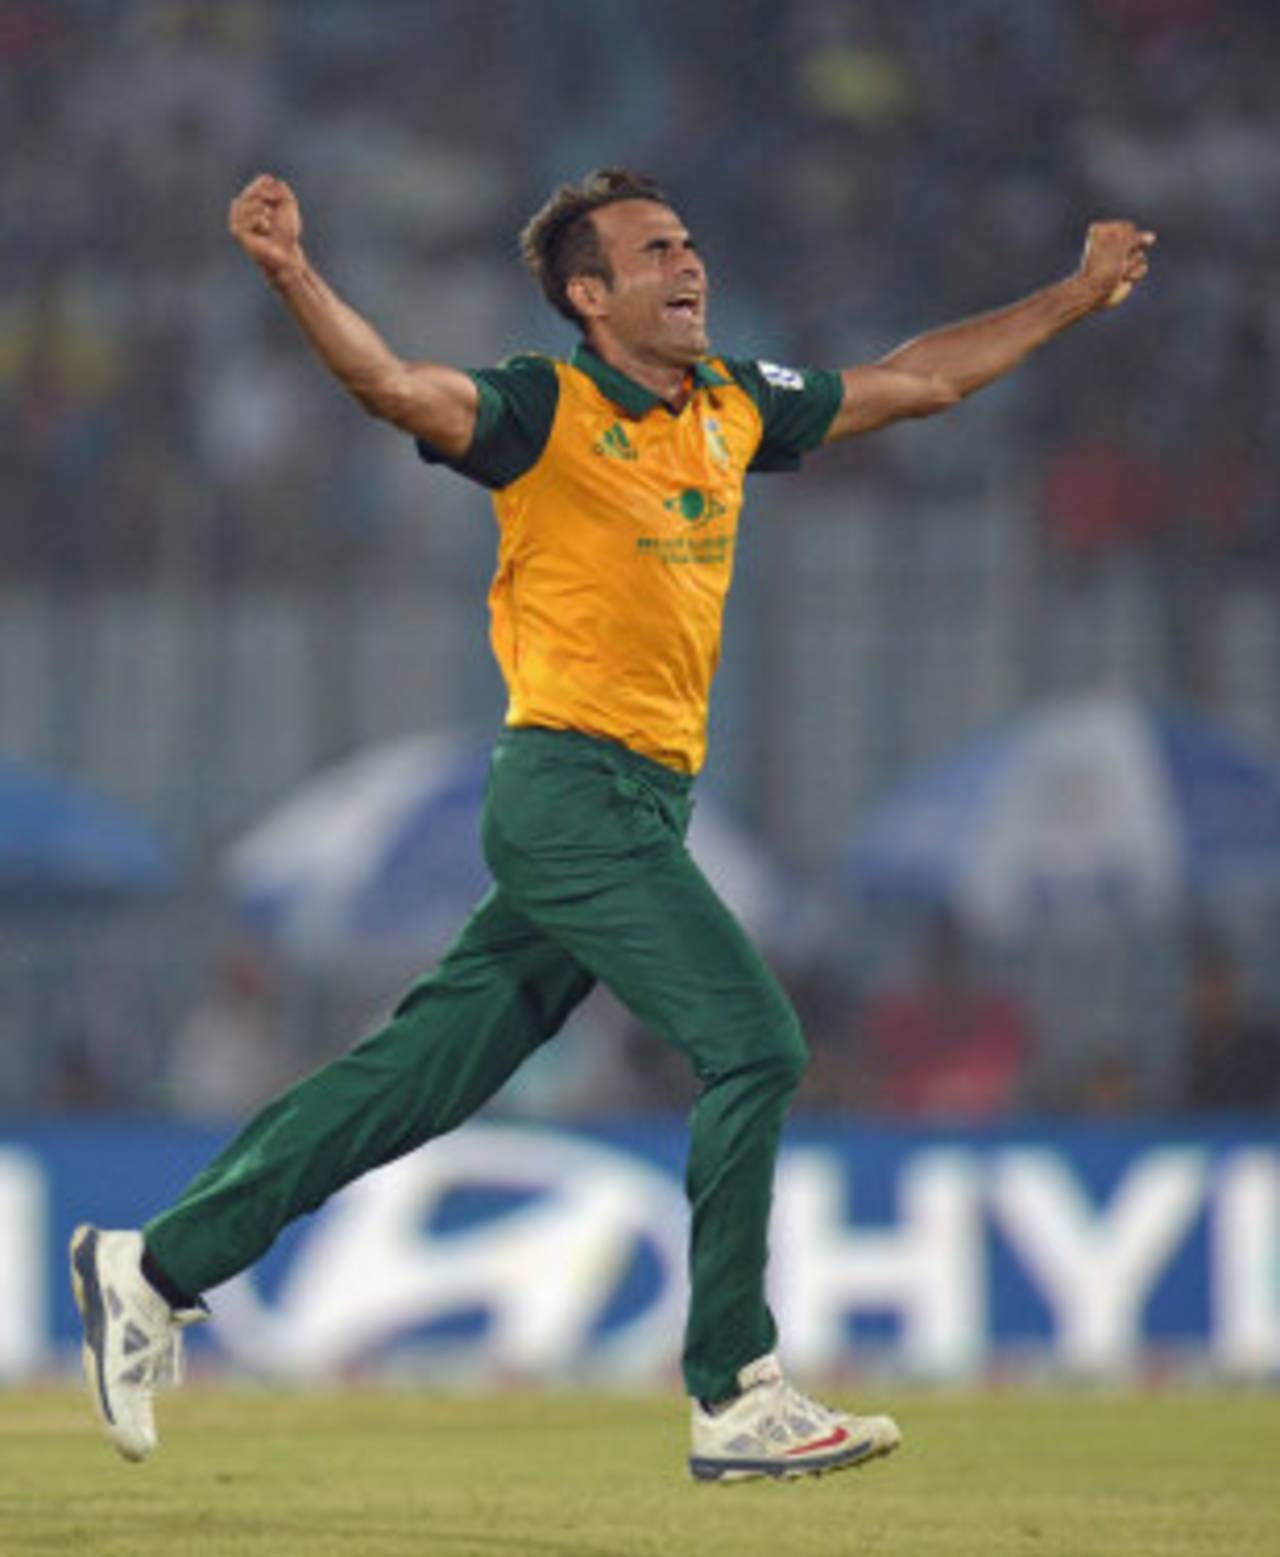 Imran Tahir has had a successful tournament after a tough outing in Tests and ODIs&nbsp;&nbsp;&bull;&nbsp;&nbsp;Getty Images